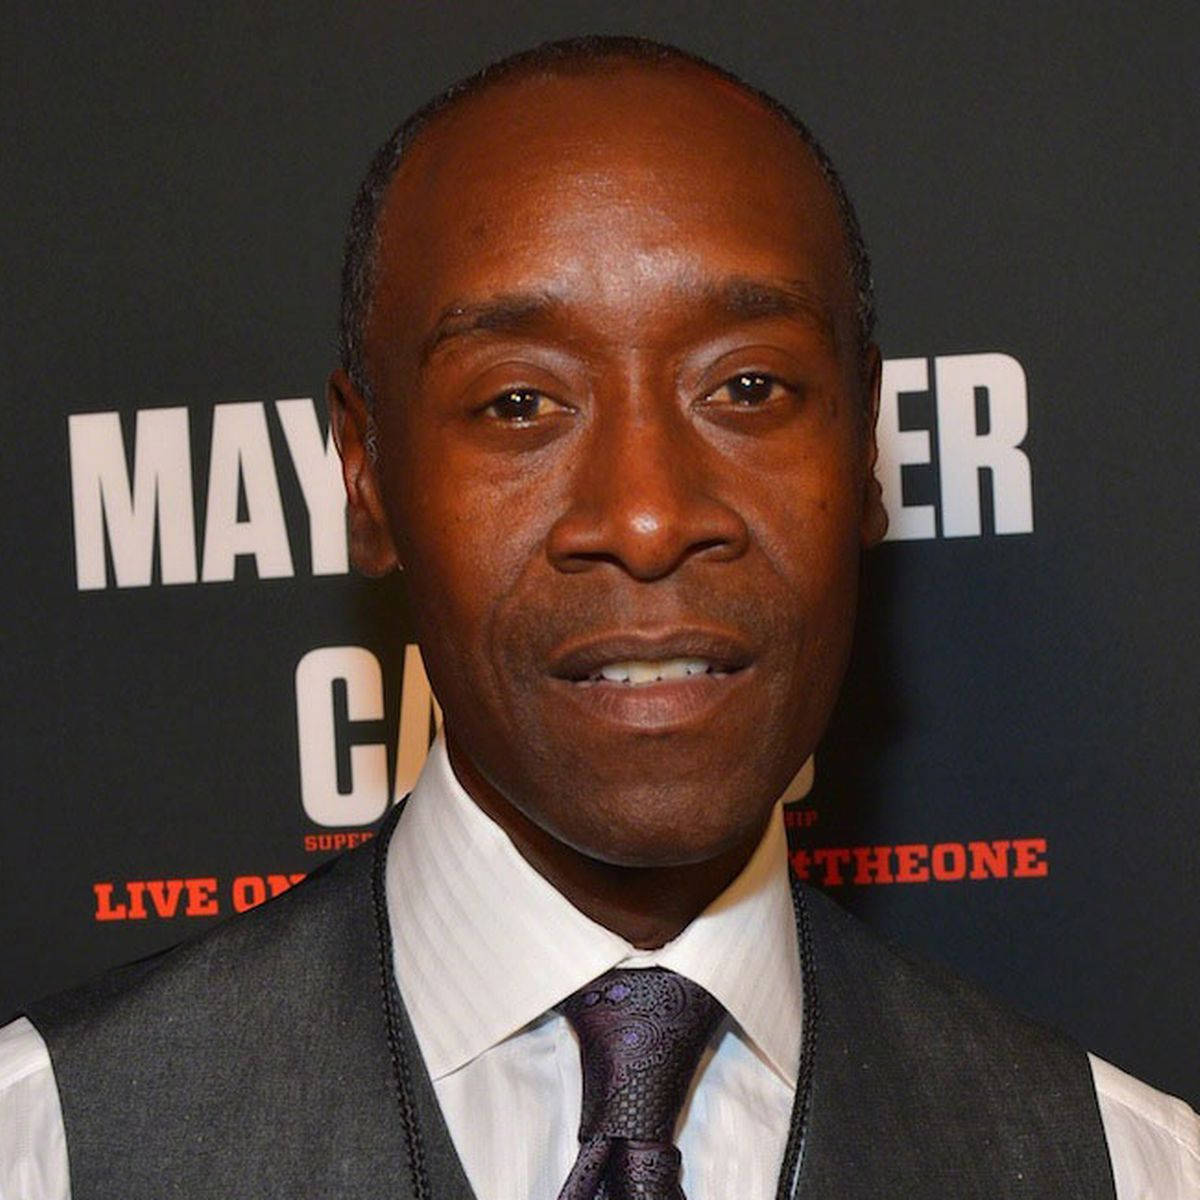 Hollywood star Don Cheadle in a screening room. Wallpaper